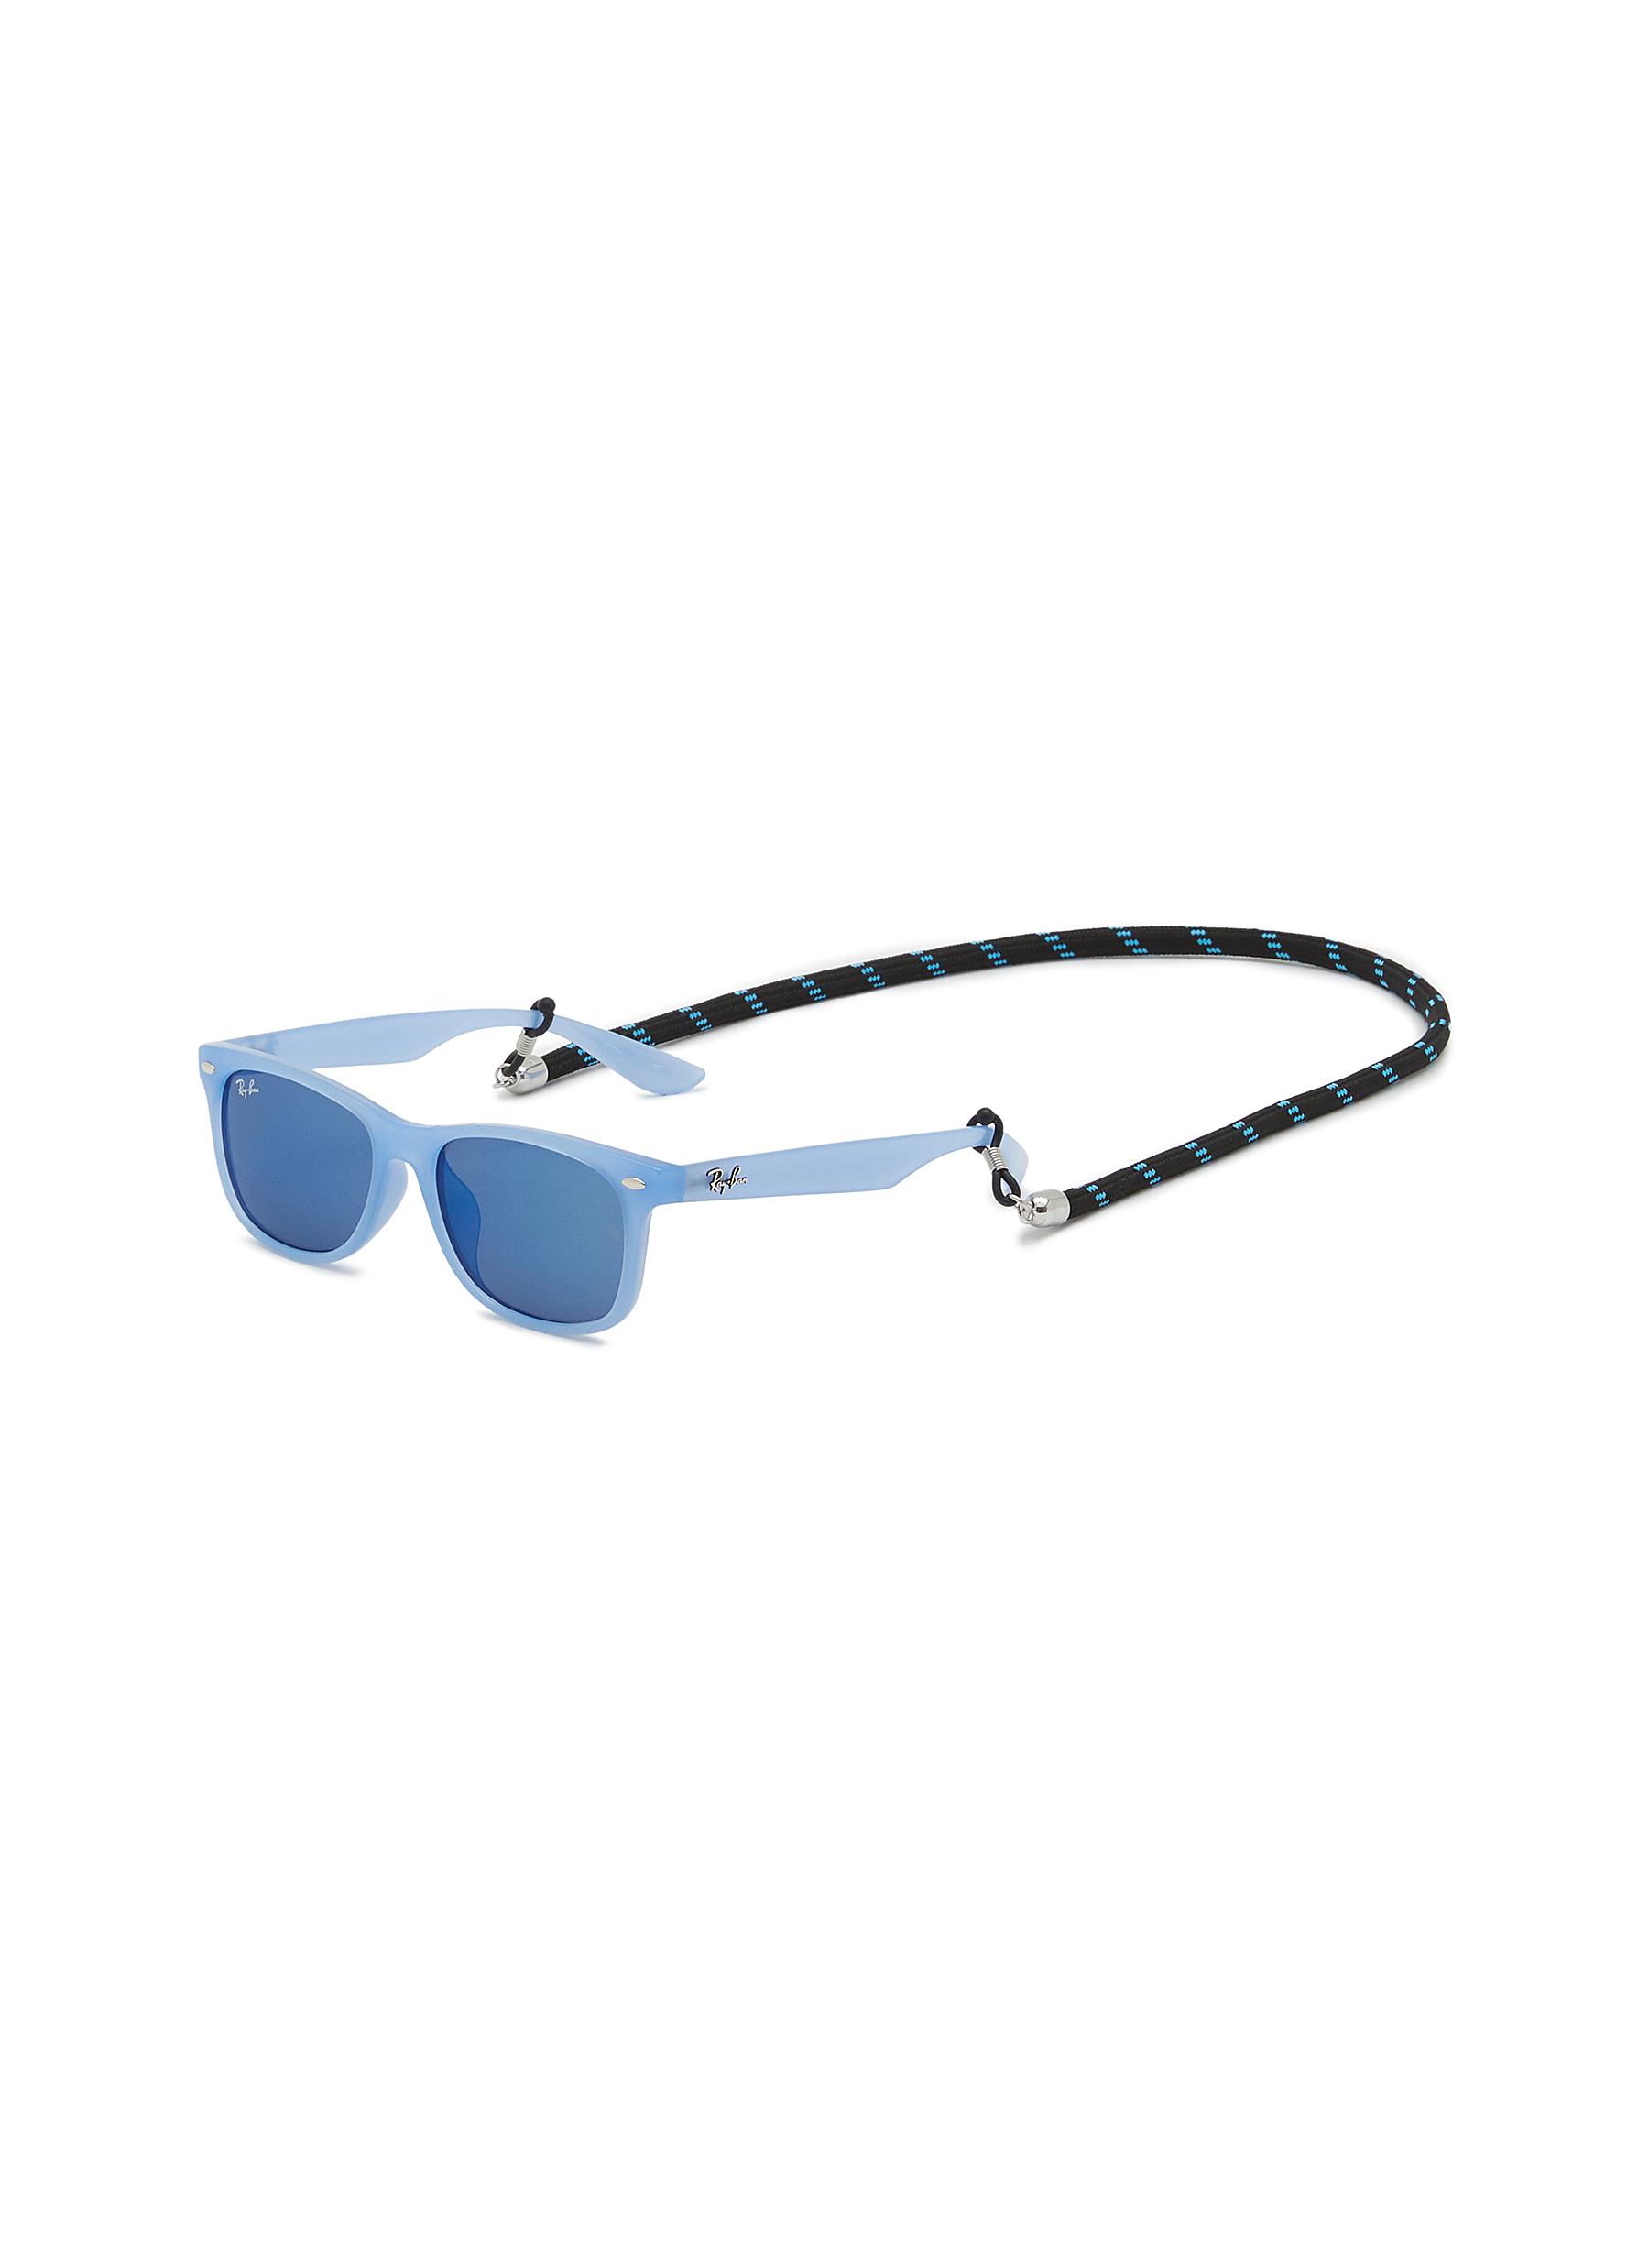 RAY BAN New Mountain Acetate Junior Sunglasses With Retainer | Kids | Lane